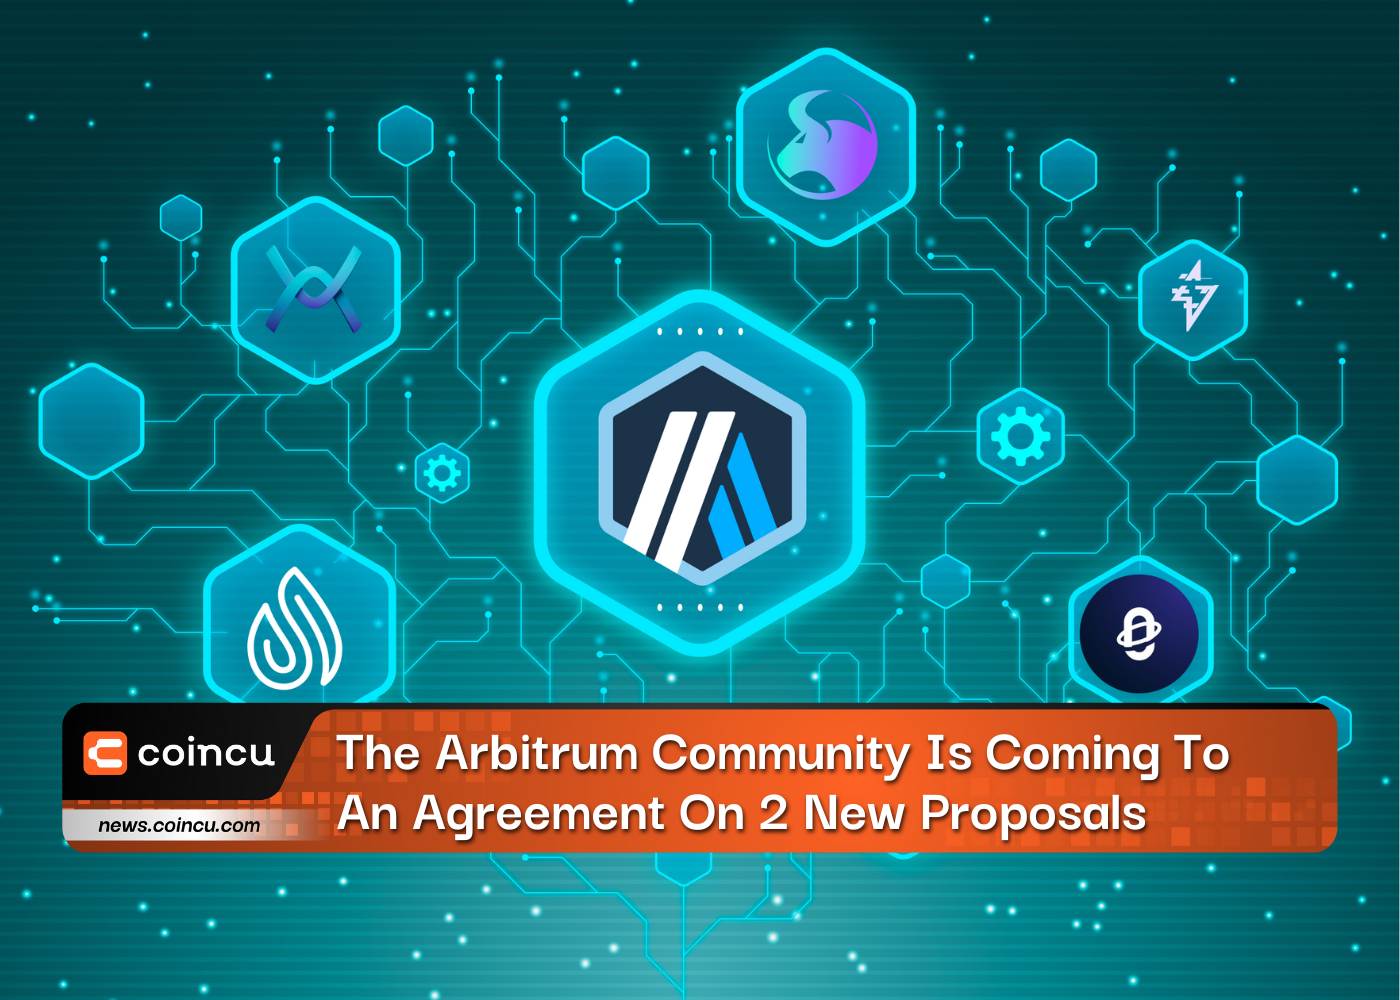 The Arbitrum Community Is Coming To An Agreement On 2 New Proposals